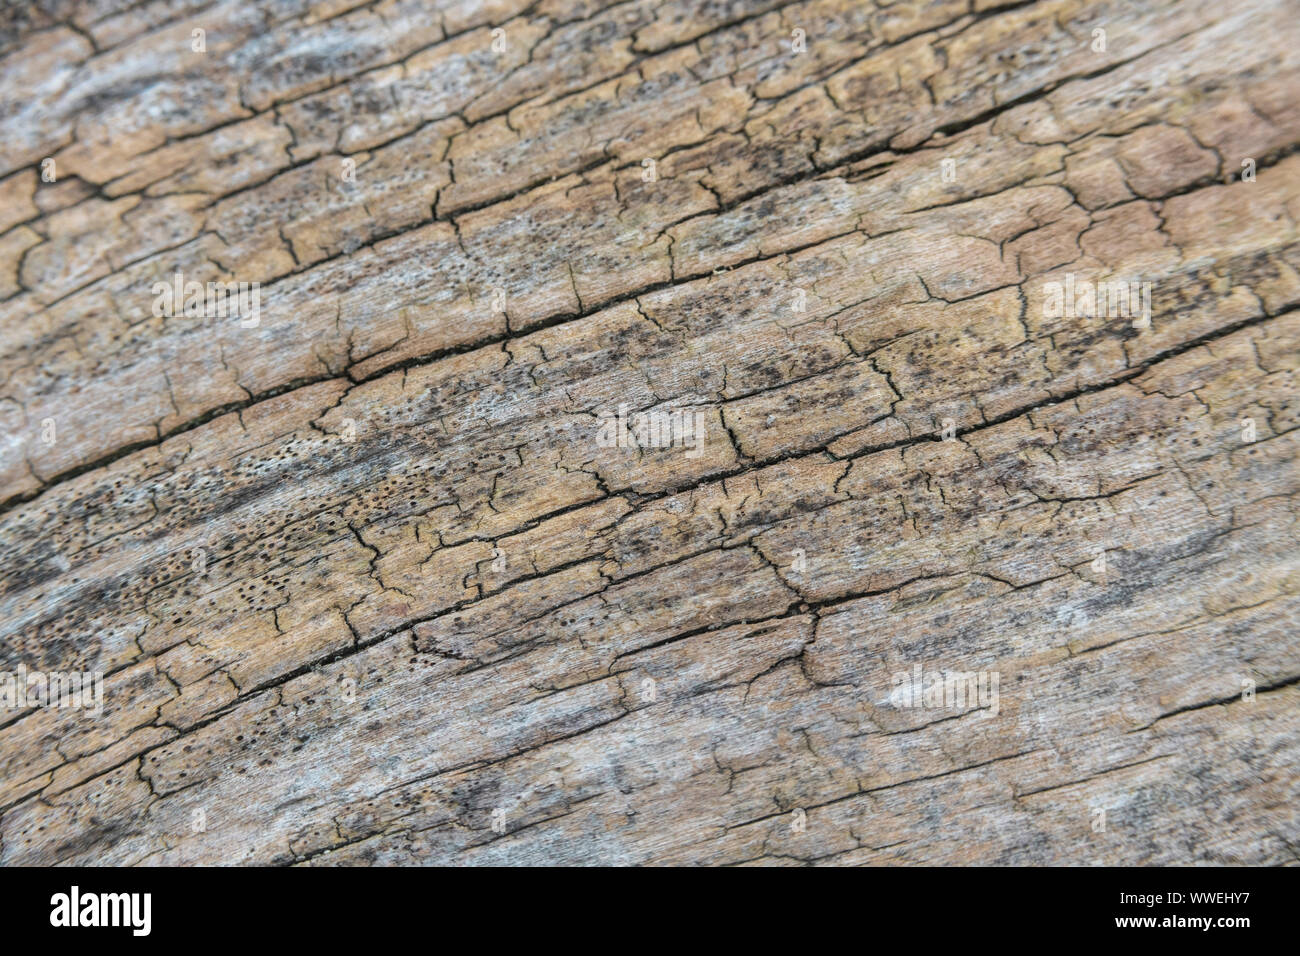 Macro close-up shot of rotting tree trunk wood texture. Curved trunk gives shallow DoF with focus limited to central image parts & rest falling away. Stock Photo